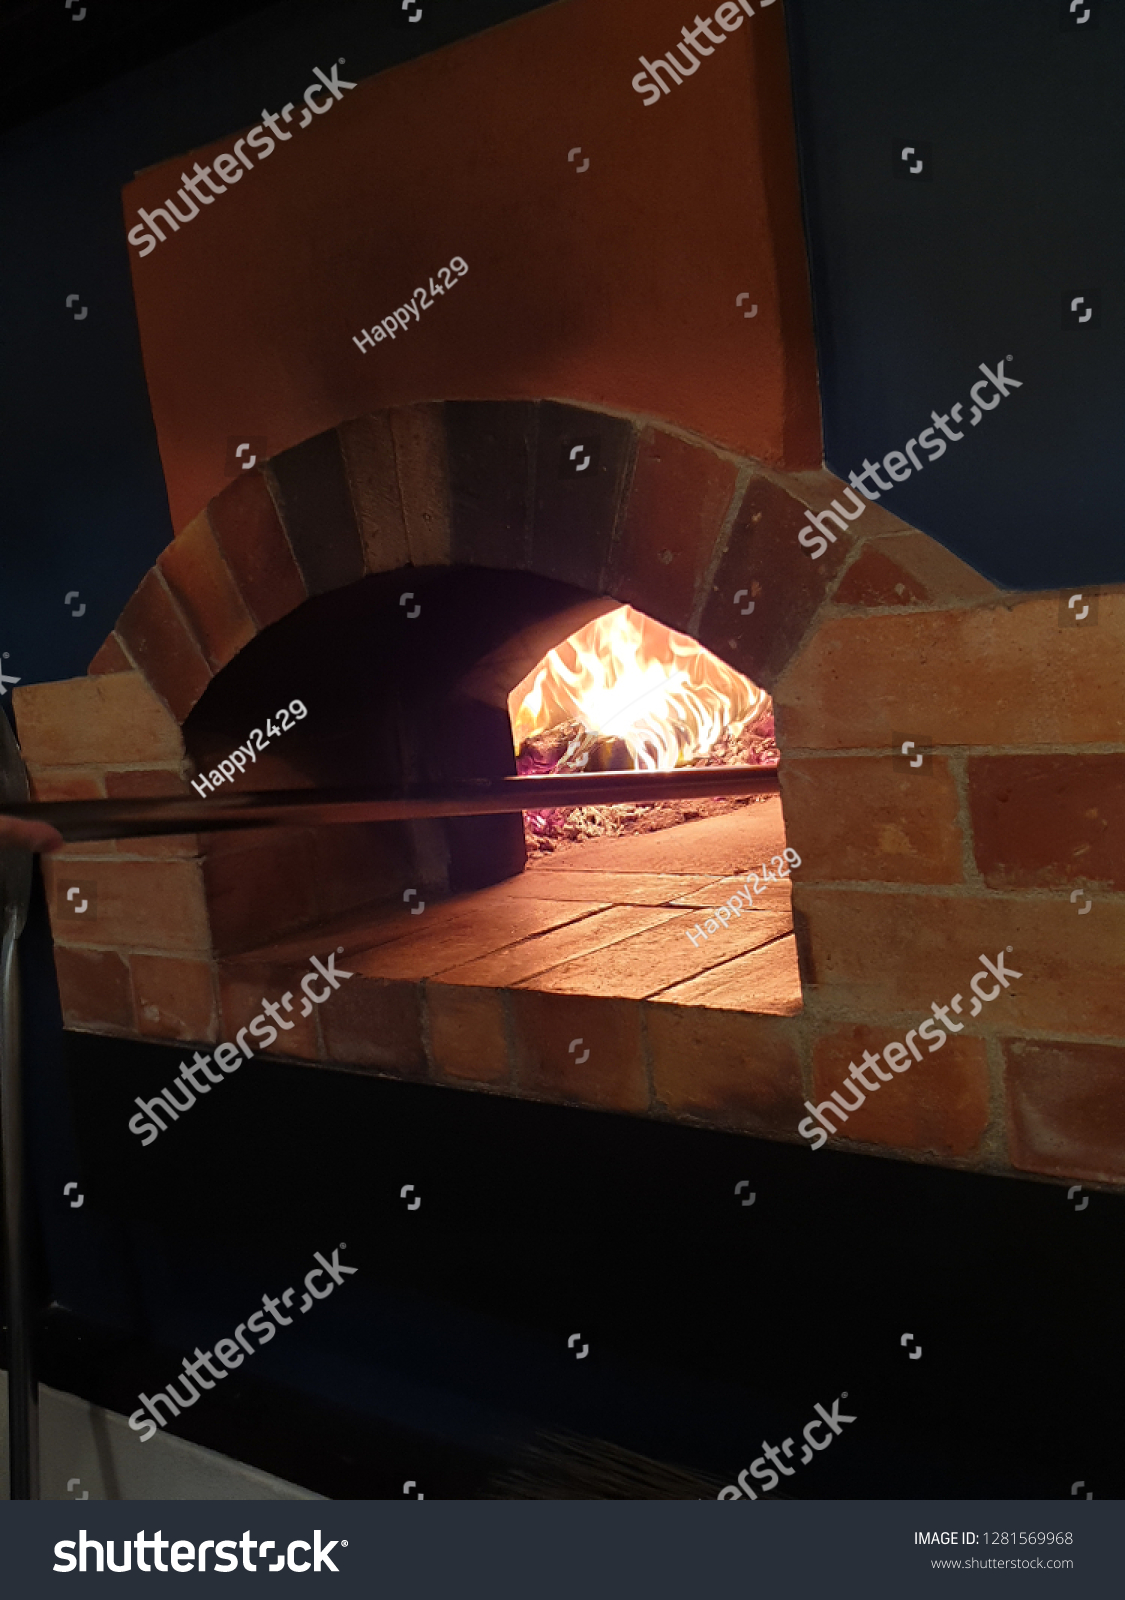 Making Original Wood-fired pizza oven #1281569968